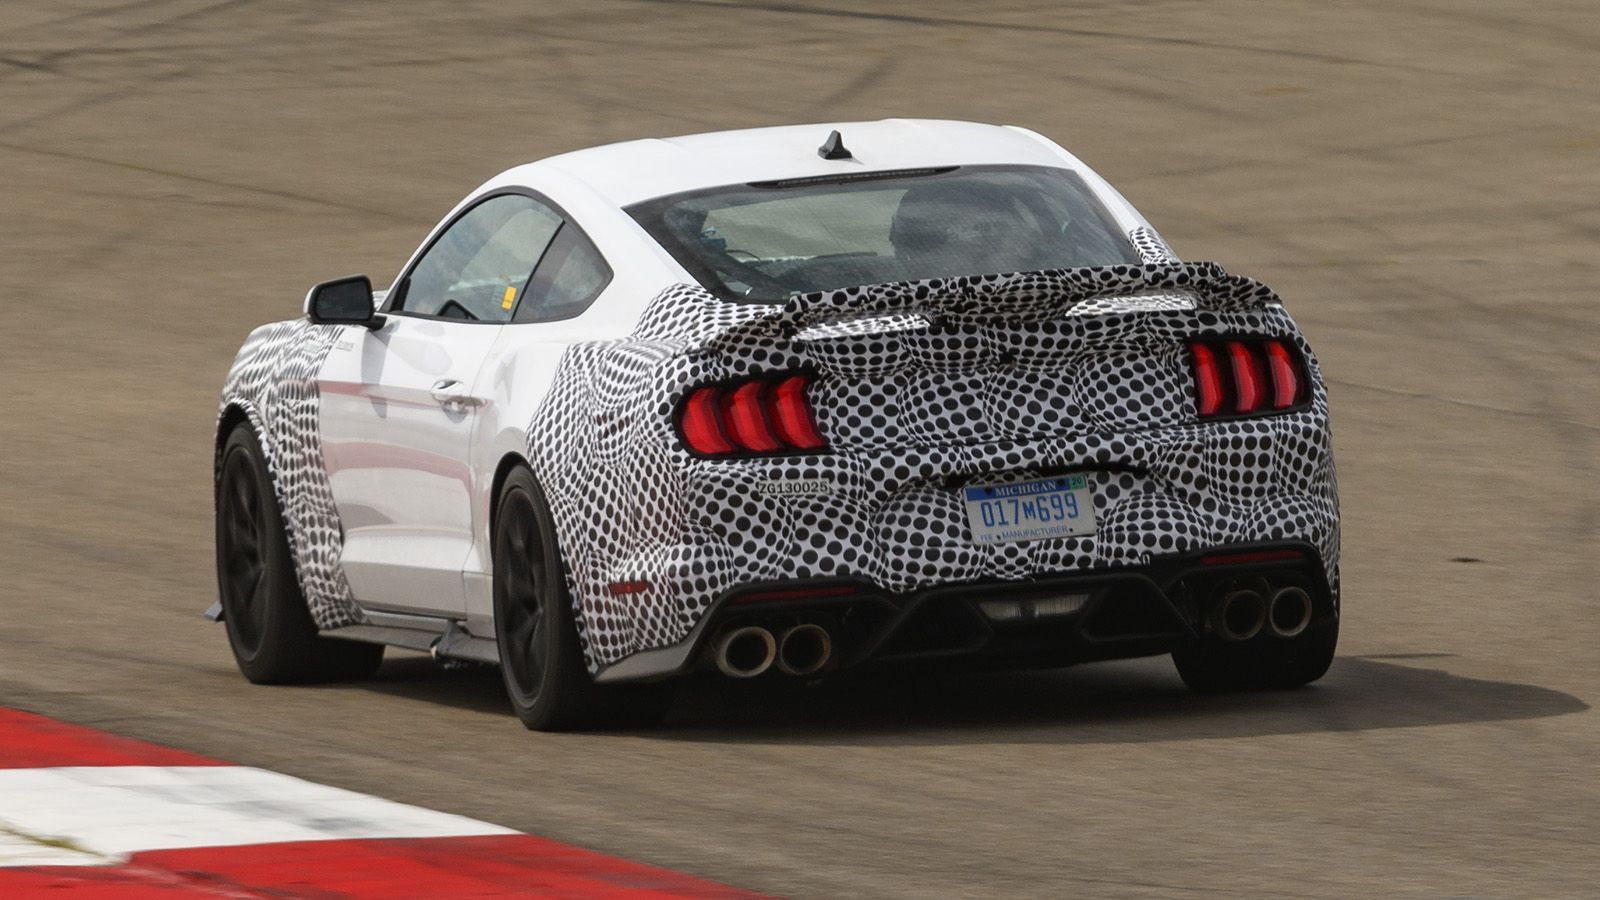 Ford Mustang Mach 1 Could Get 525 HP, Report Says